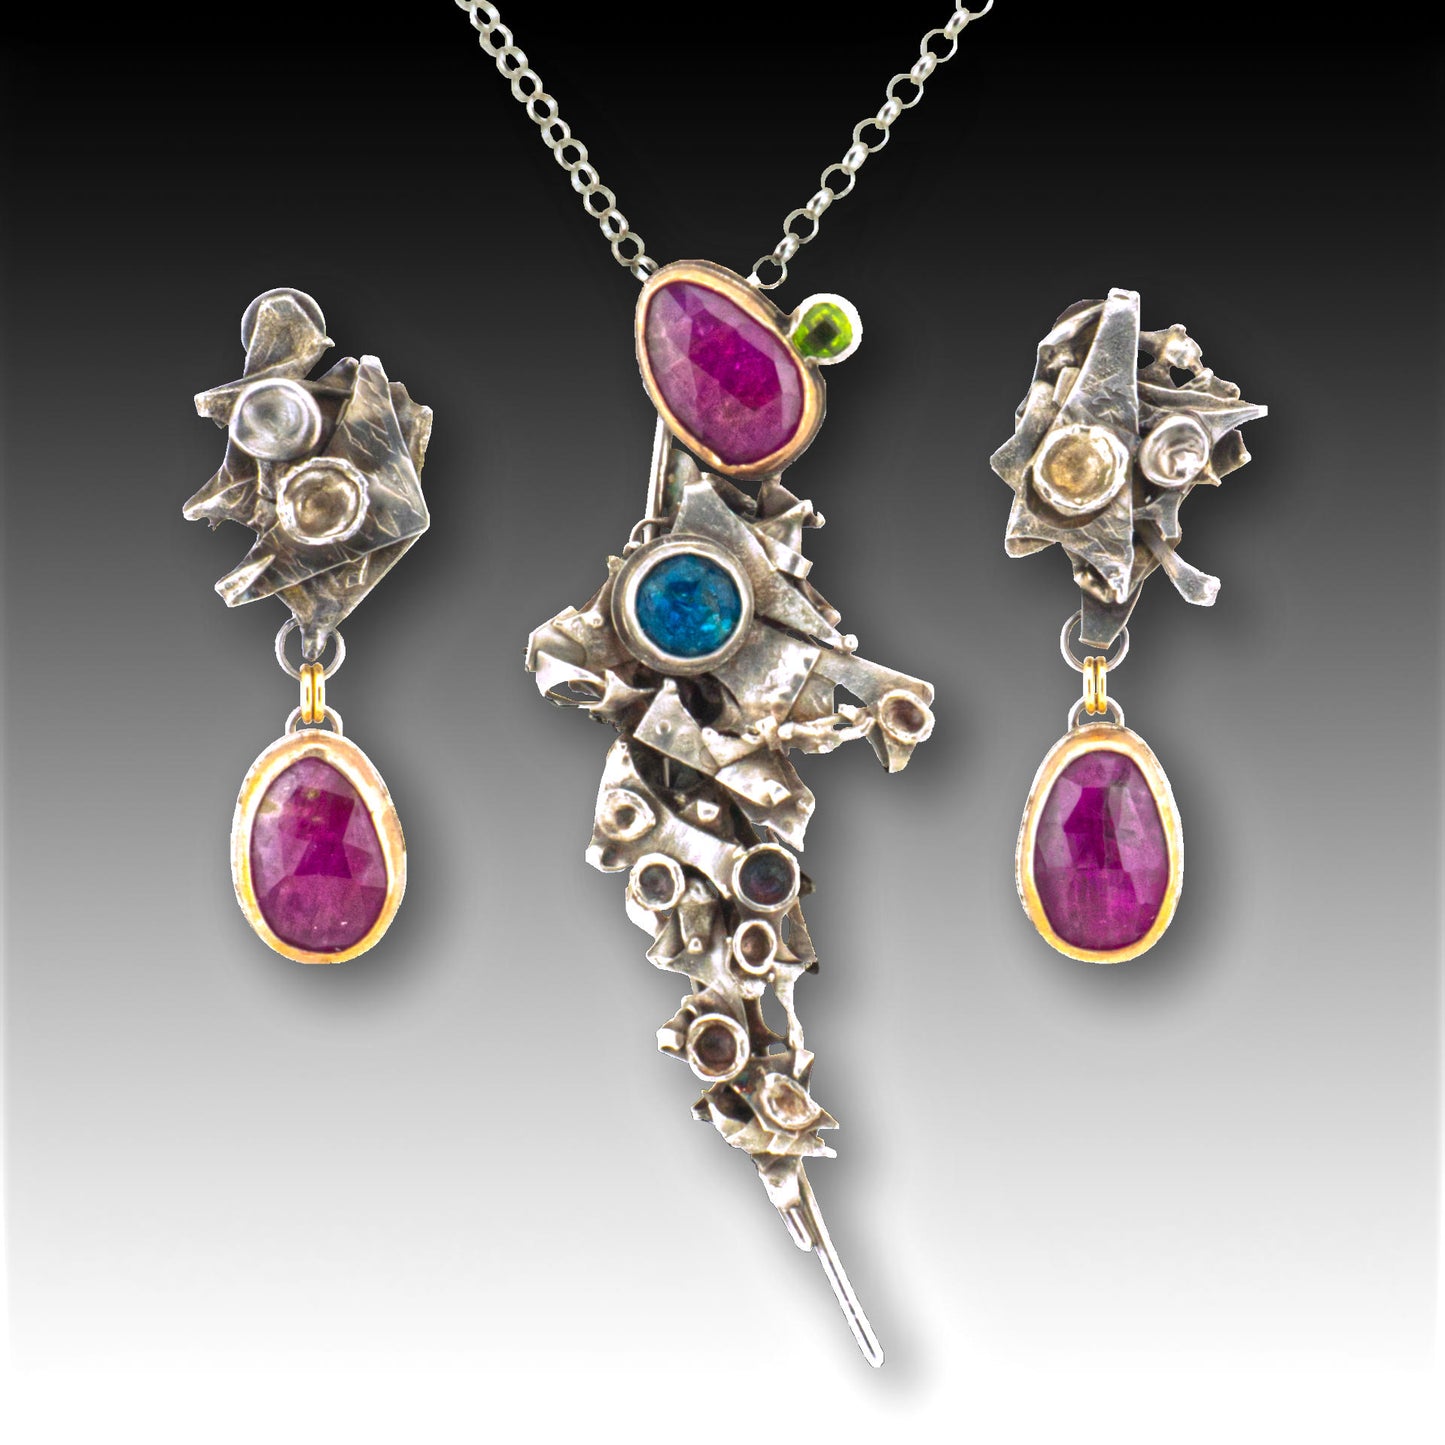 Cosmic Dream Sterling with Ruby, Peridot & Apatite Pendant Necklace & Ruby Earrings